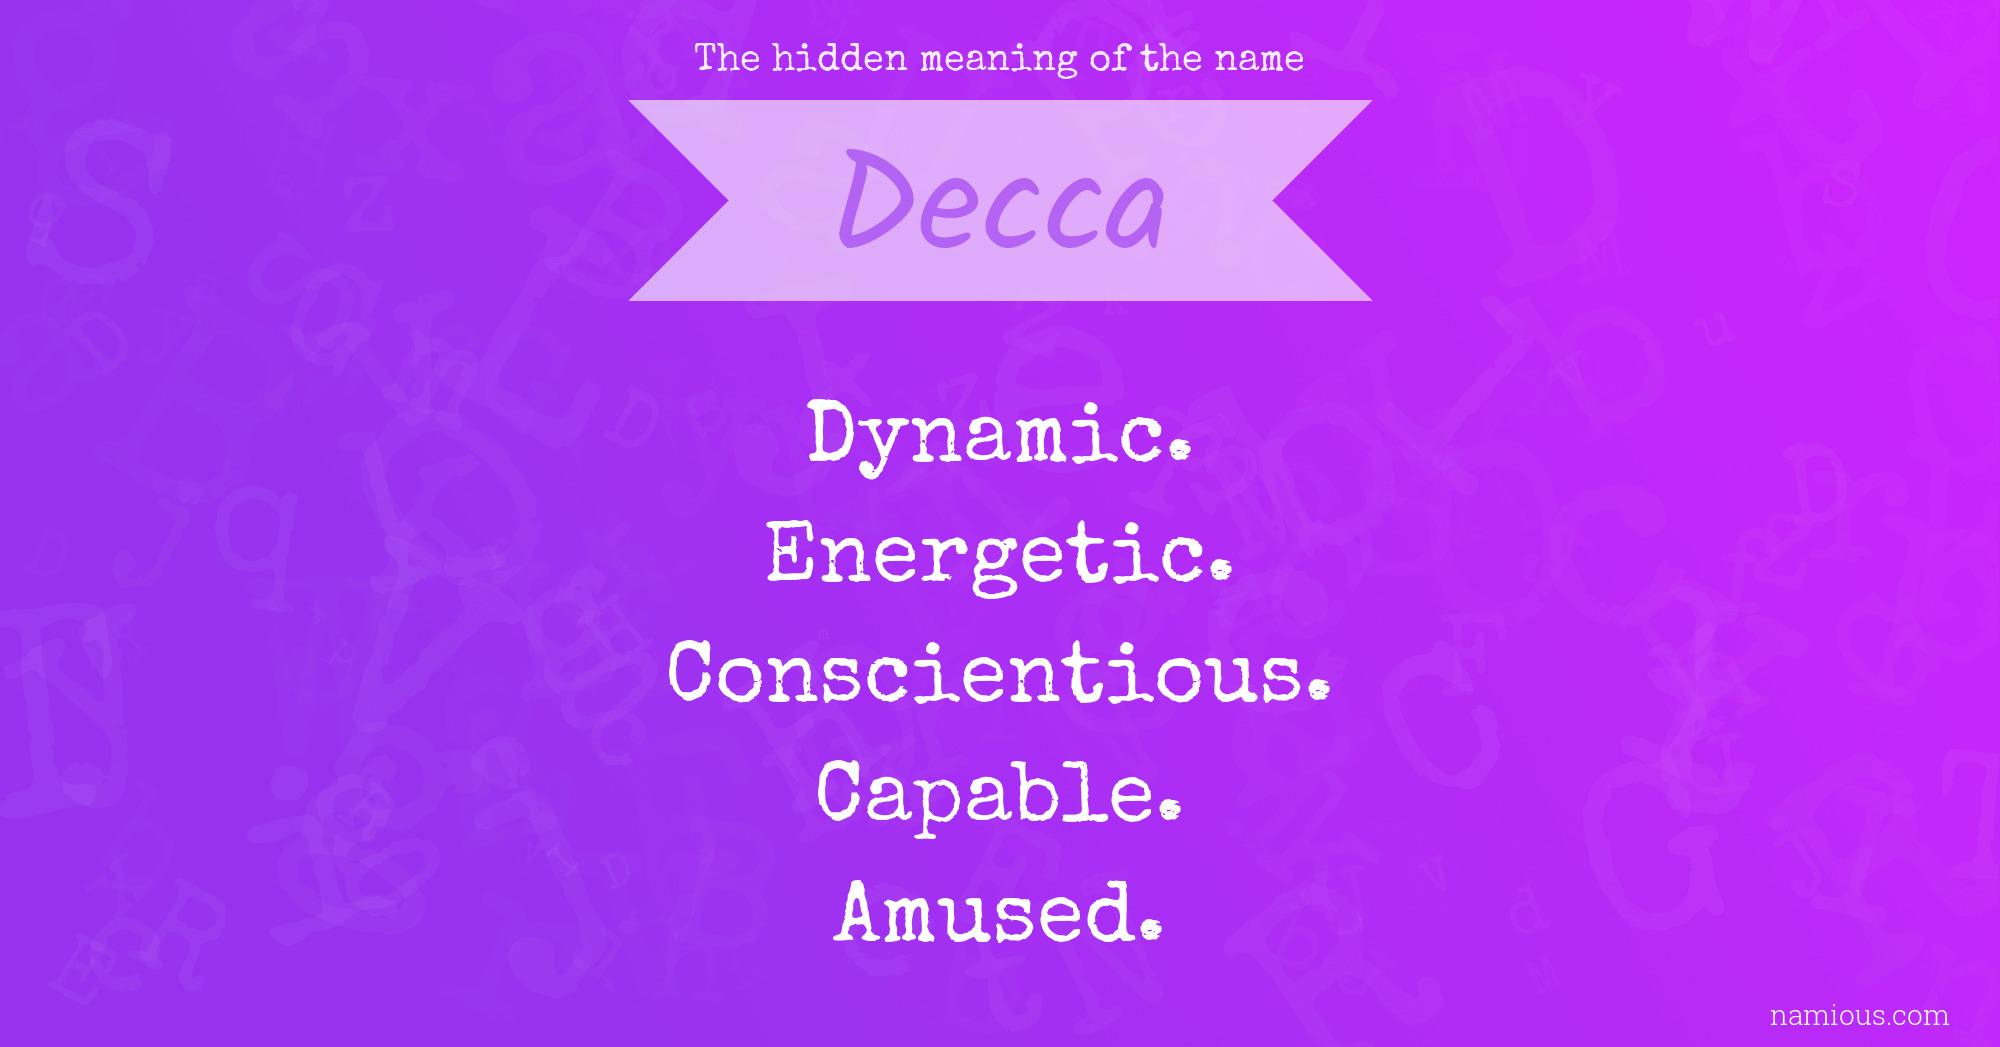 The hidden meaning of the name Decca